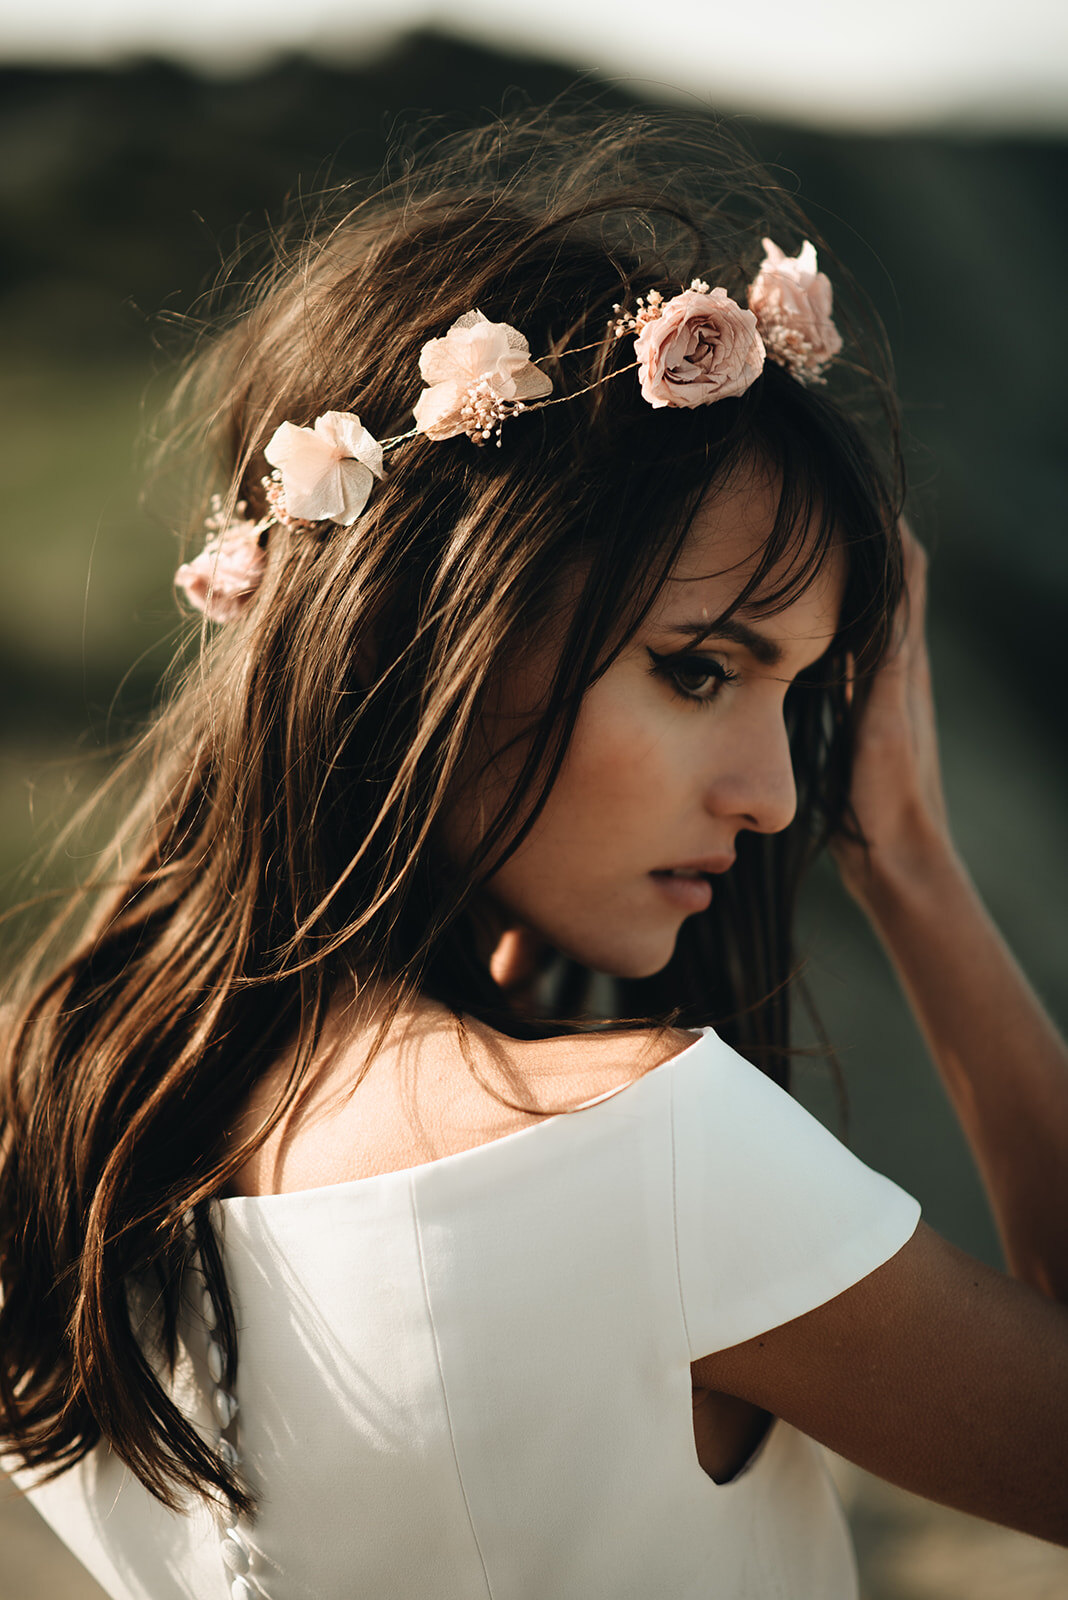 Aggregate more than 139 boho hairstyles with flowers